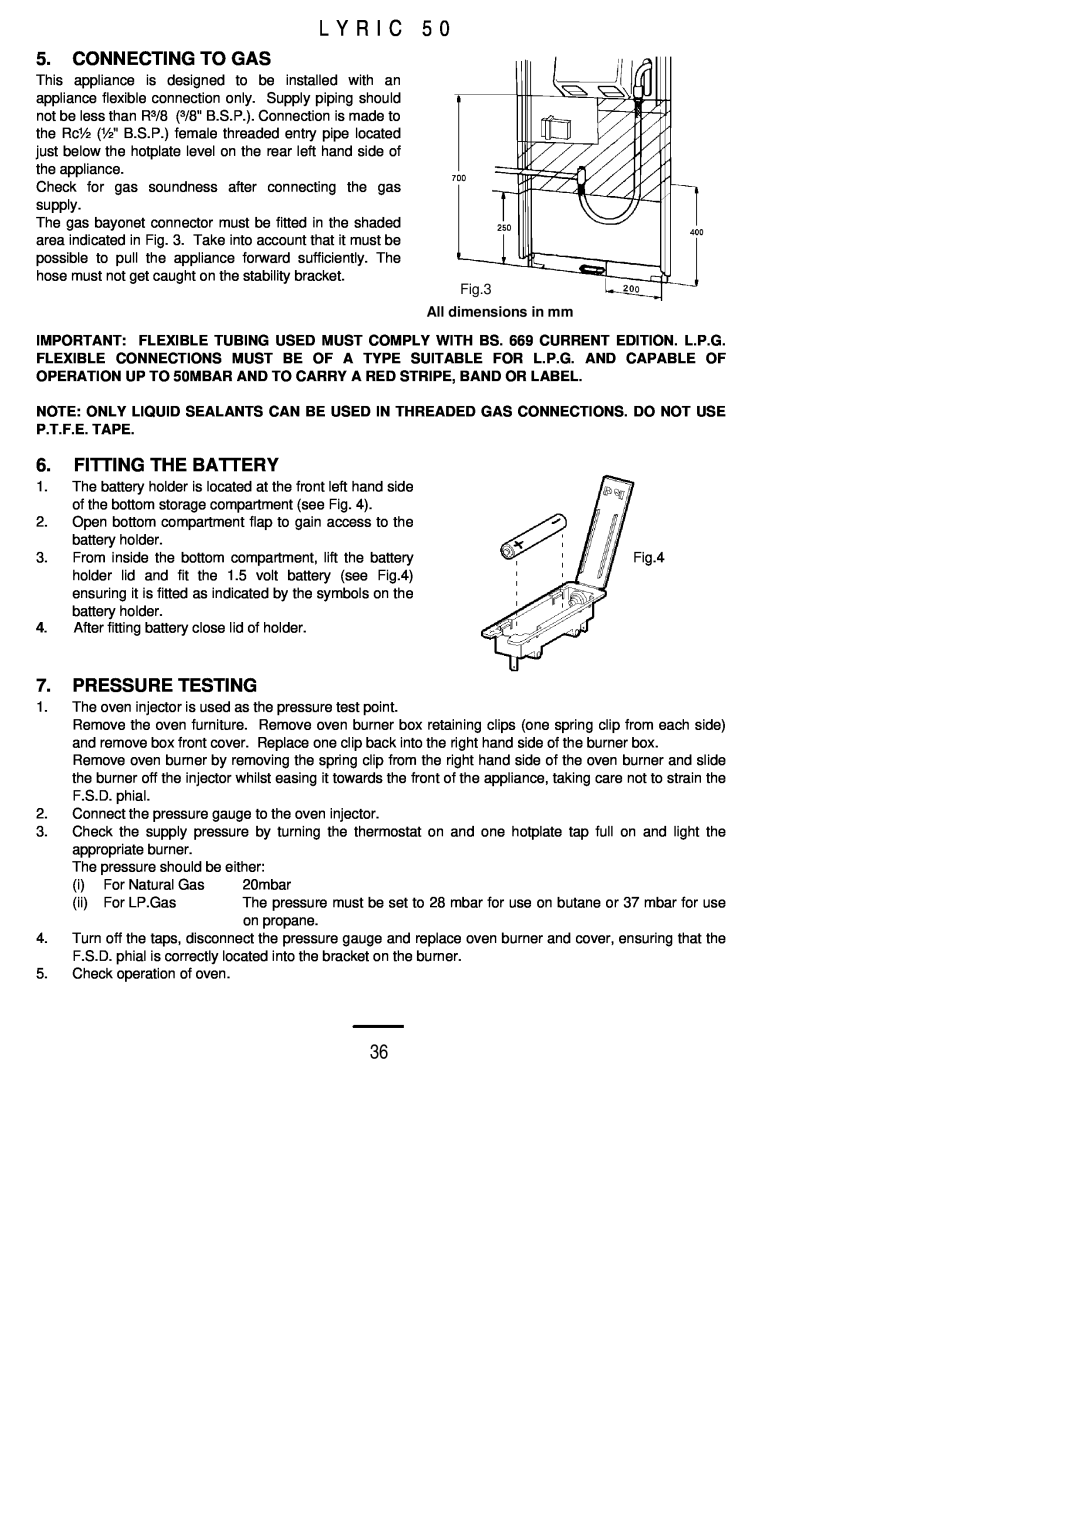 Electrolux LYRIC50 installation instructions L Y R I C, Connecting To Gas, Fitting The Battery, Pressure Testing 